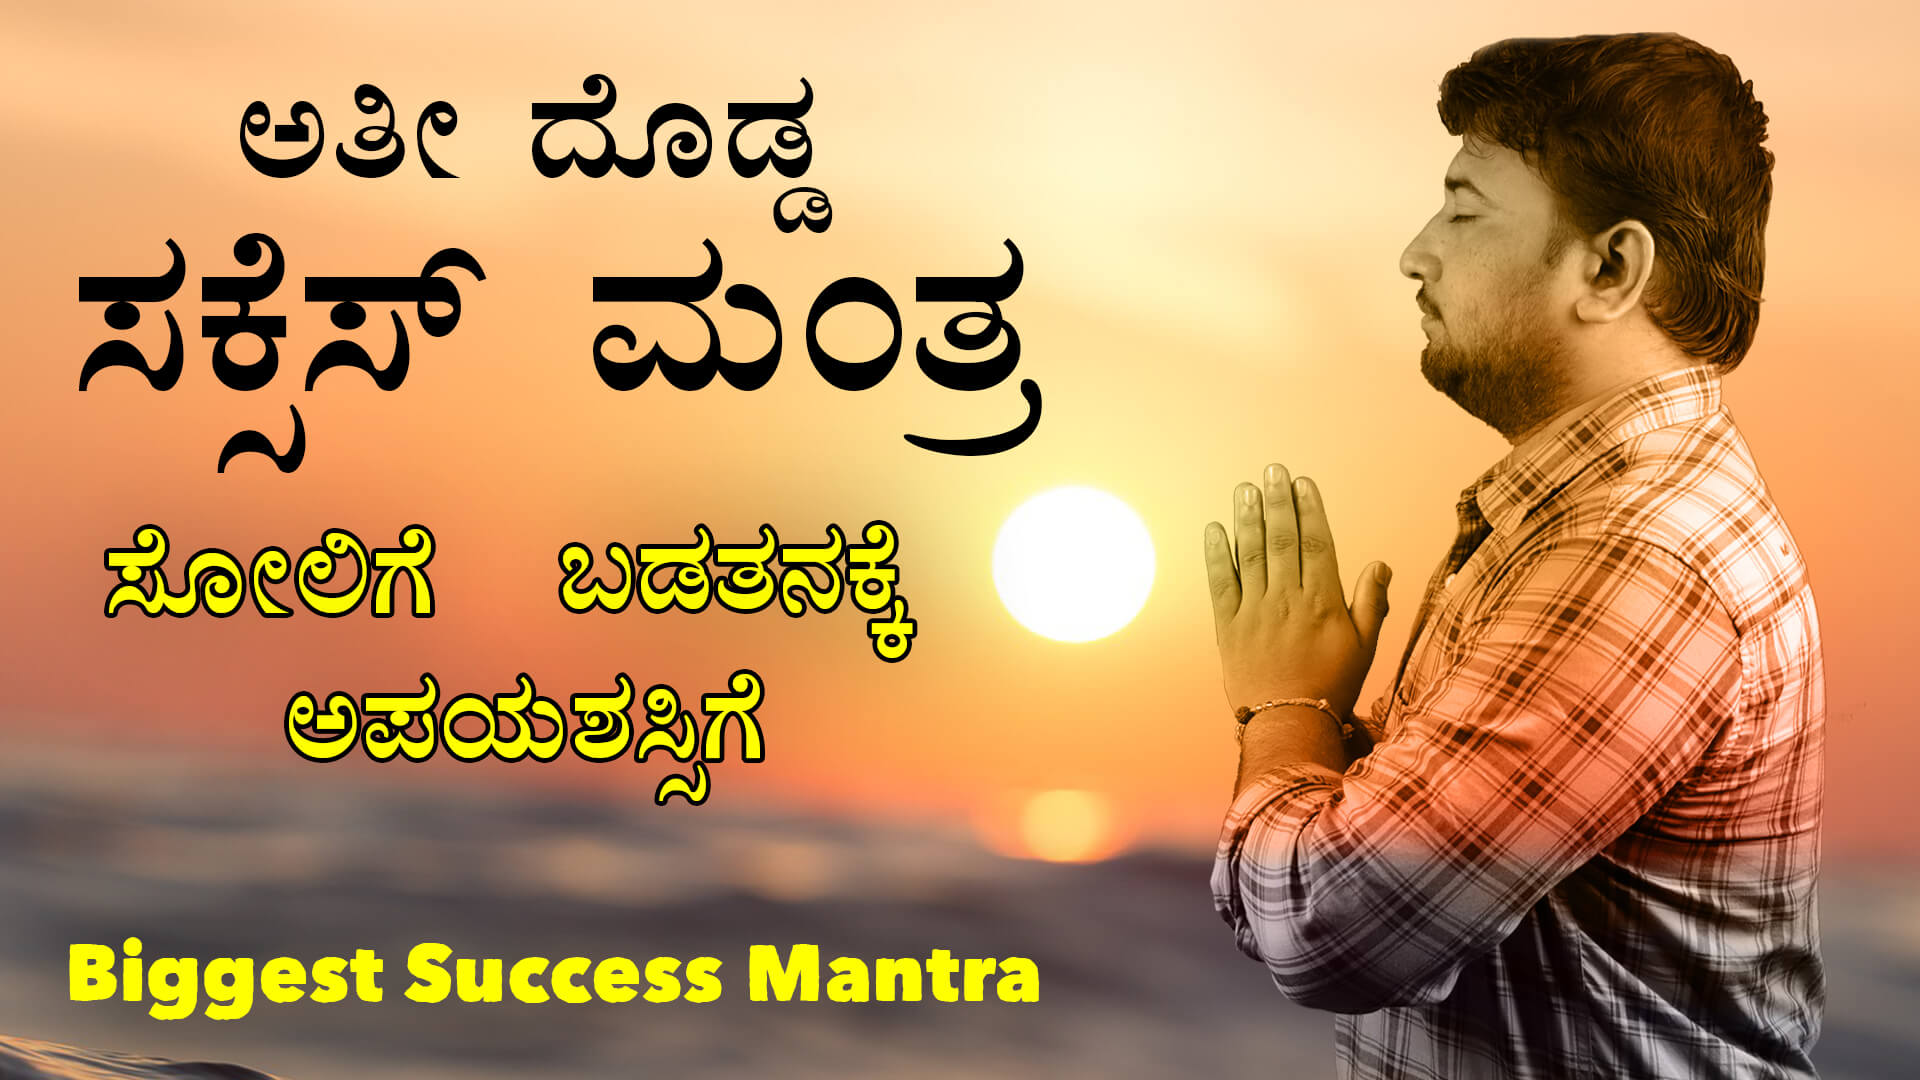 You are currently viewing ಅತೀ ದೊಡ್ಡ ಸಕ್ಸೆಸ್ ಮಂತ್ರ – Biggest Success Mantra in Kannada